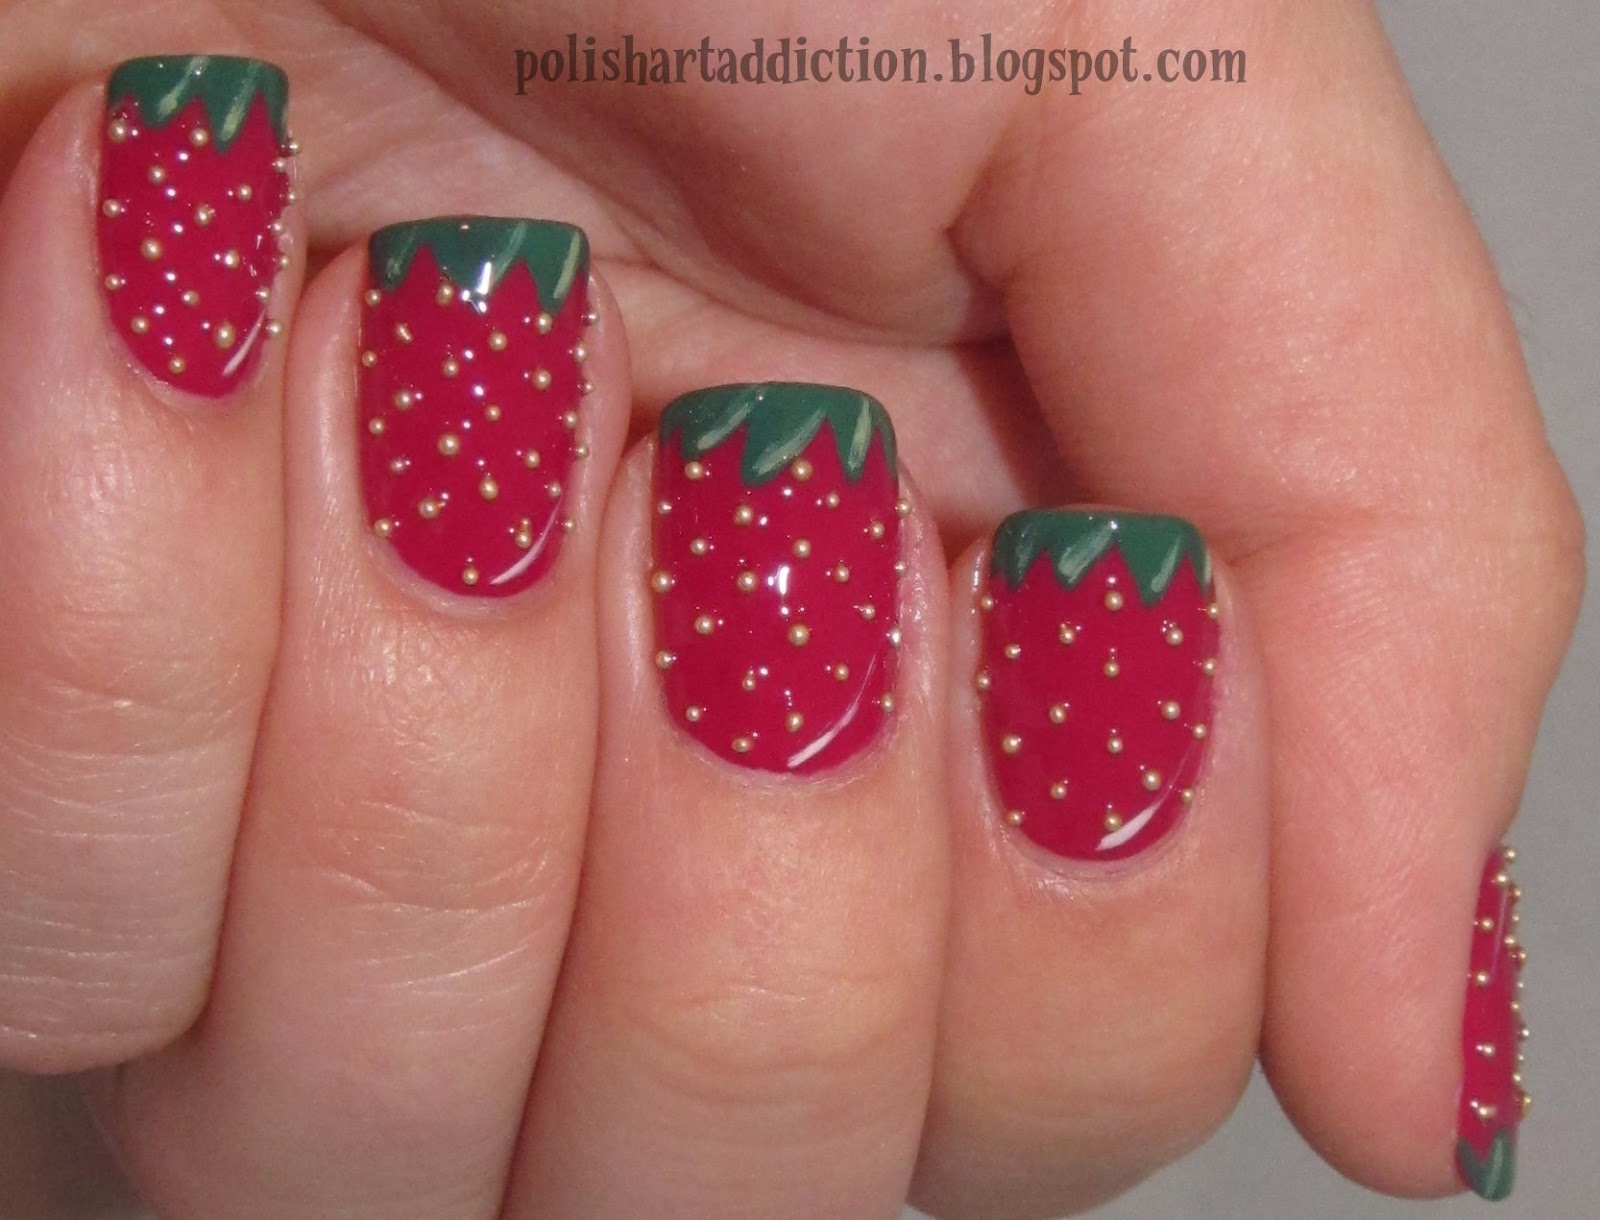 Strawberry Nail Art Tutorial for Short Nails - wide 2